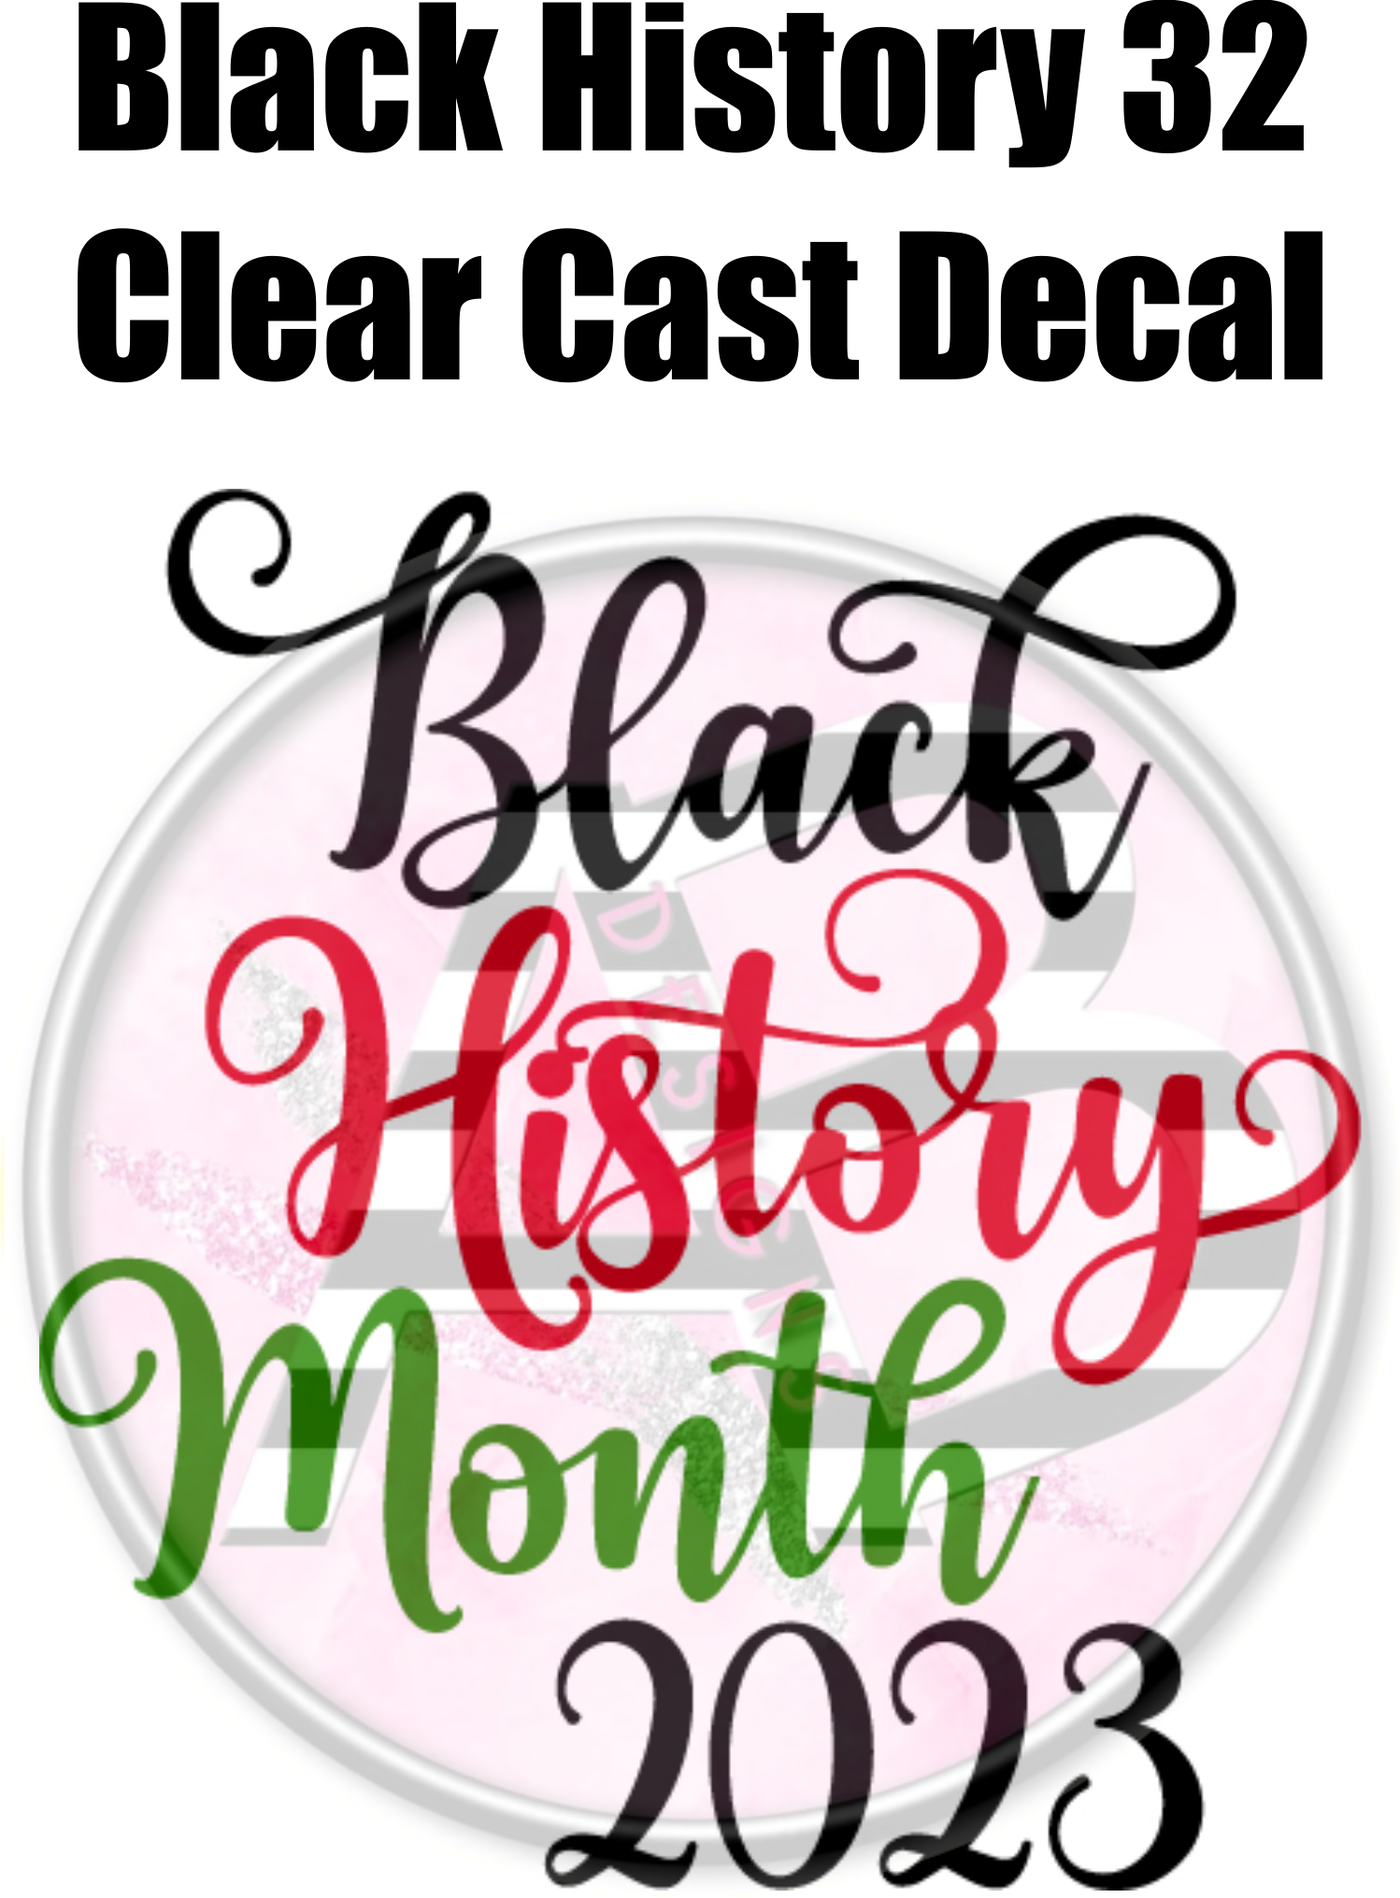 Black History 32 - Clear Cast Decal